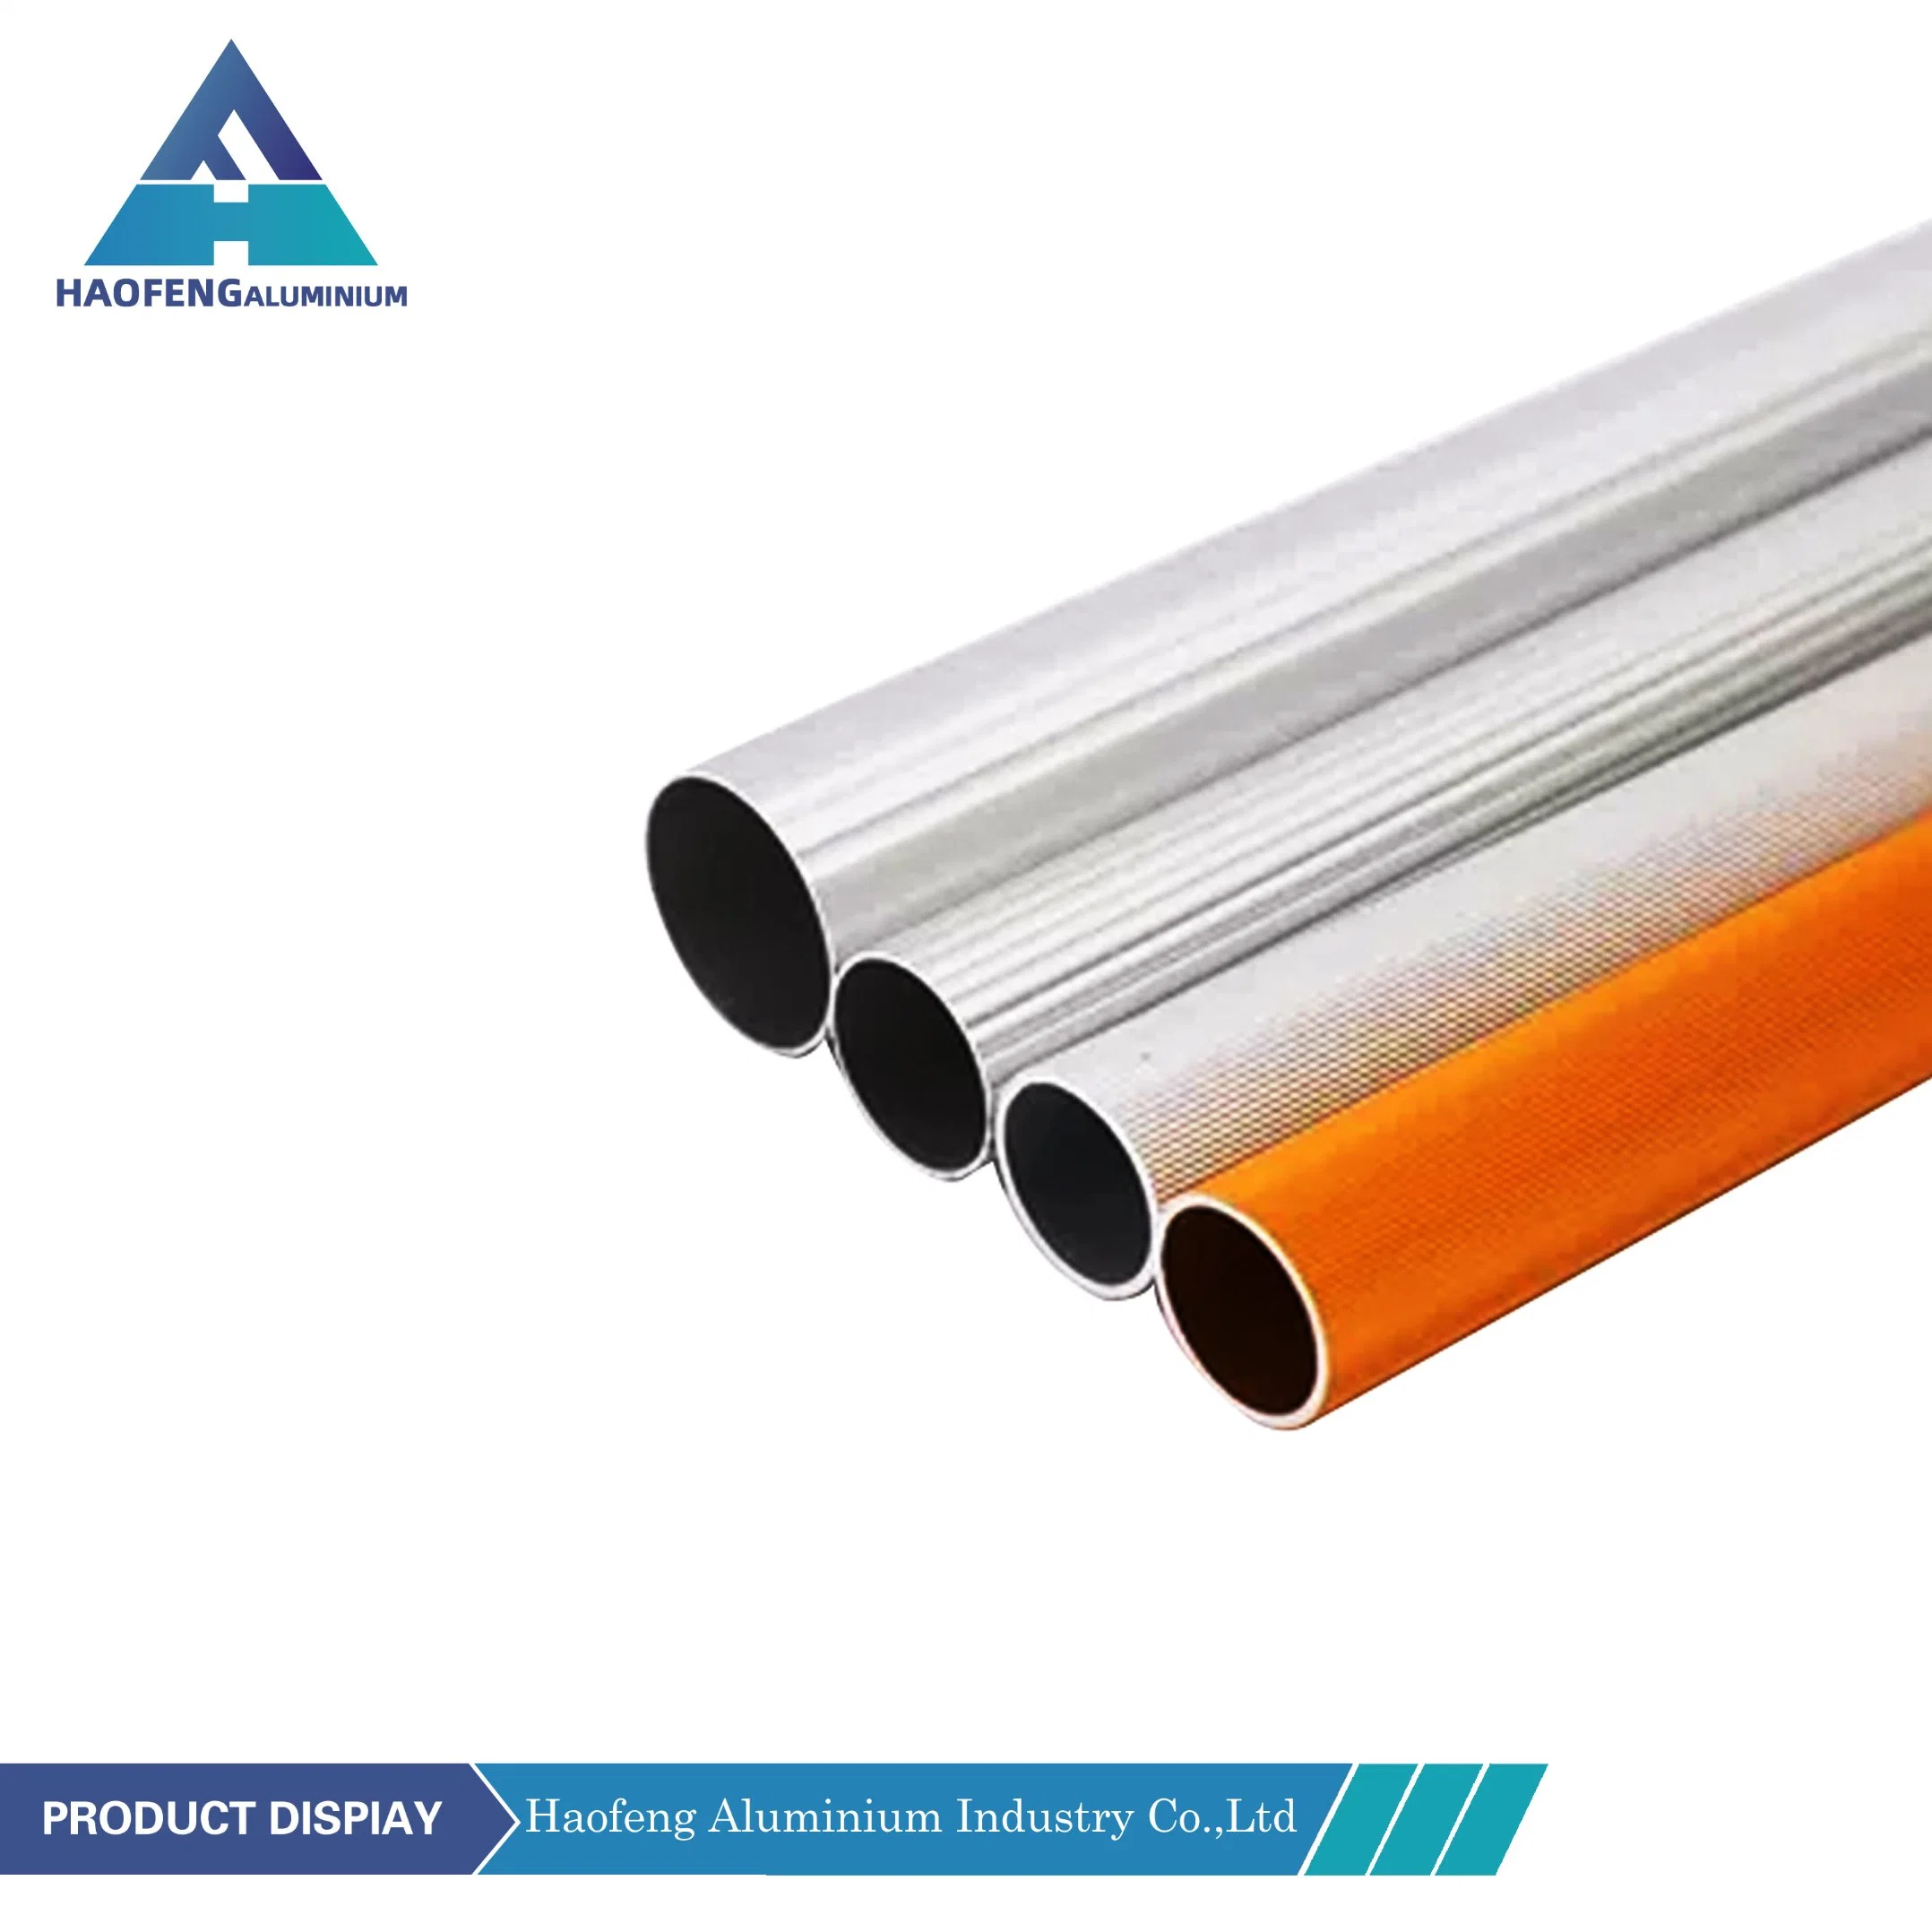 Color Anodized Thin Wall Aluminum Tubing/Tube& Pipe/Piping for Industrial Aluminium Extrusion Profile